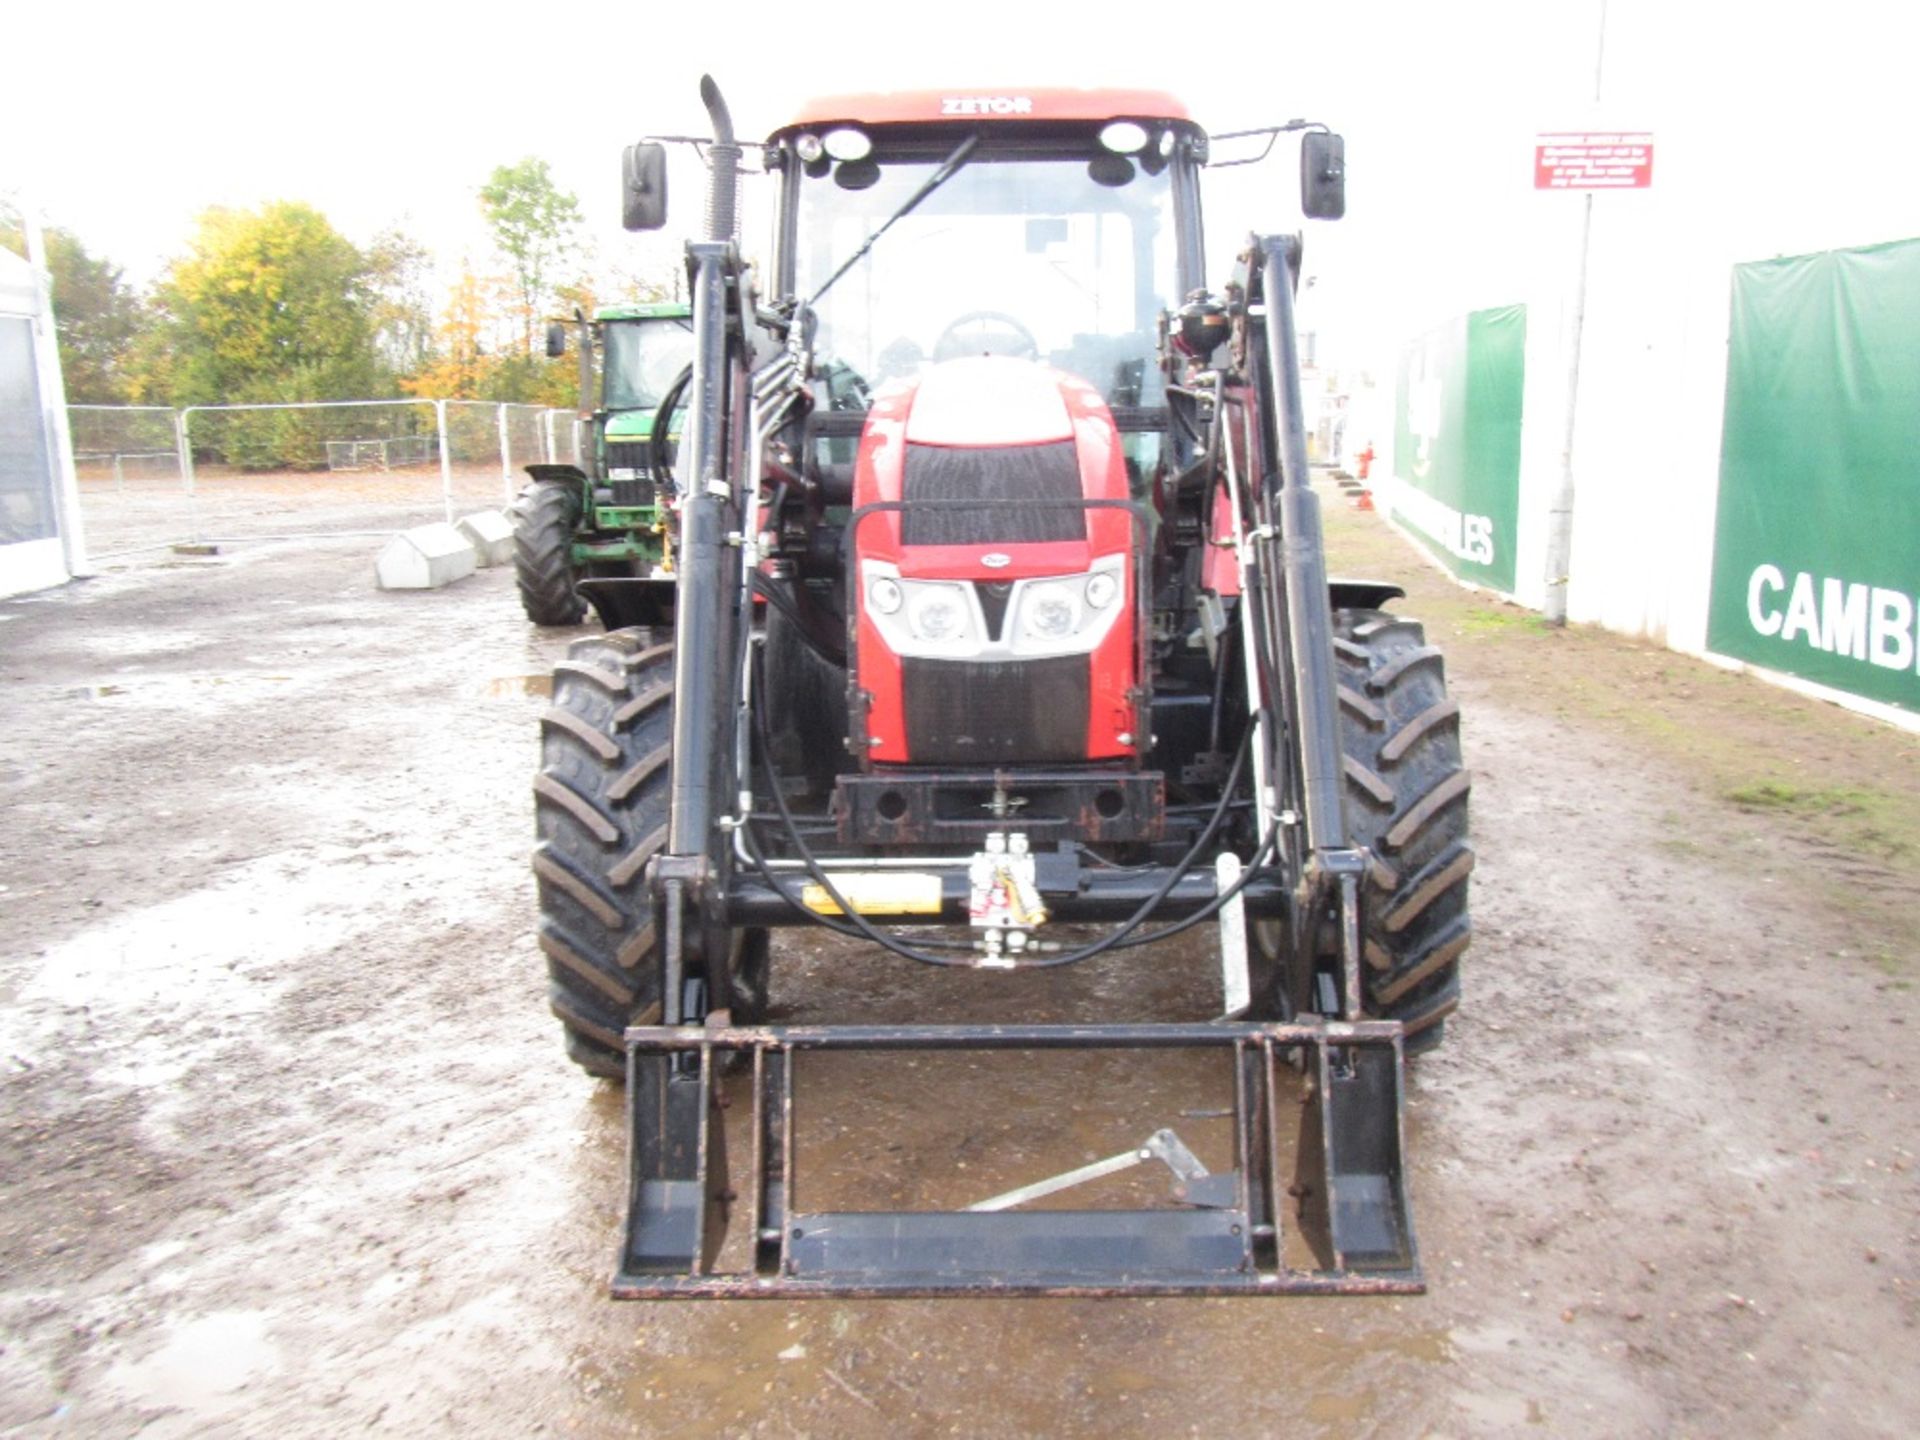 Zetor Forterra 125 4wd Tractor. 260 Trac Lift Loader. Reg Docs will be supplied. Reg. No. AE12 BKN. - Image 3 of 15